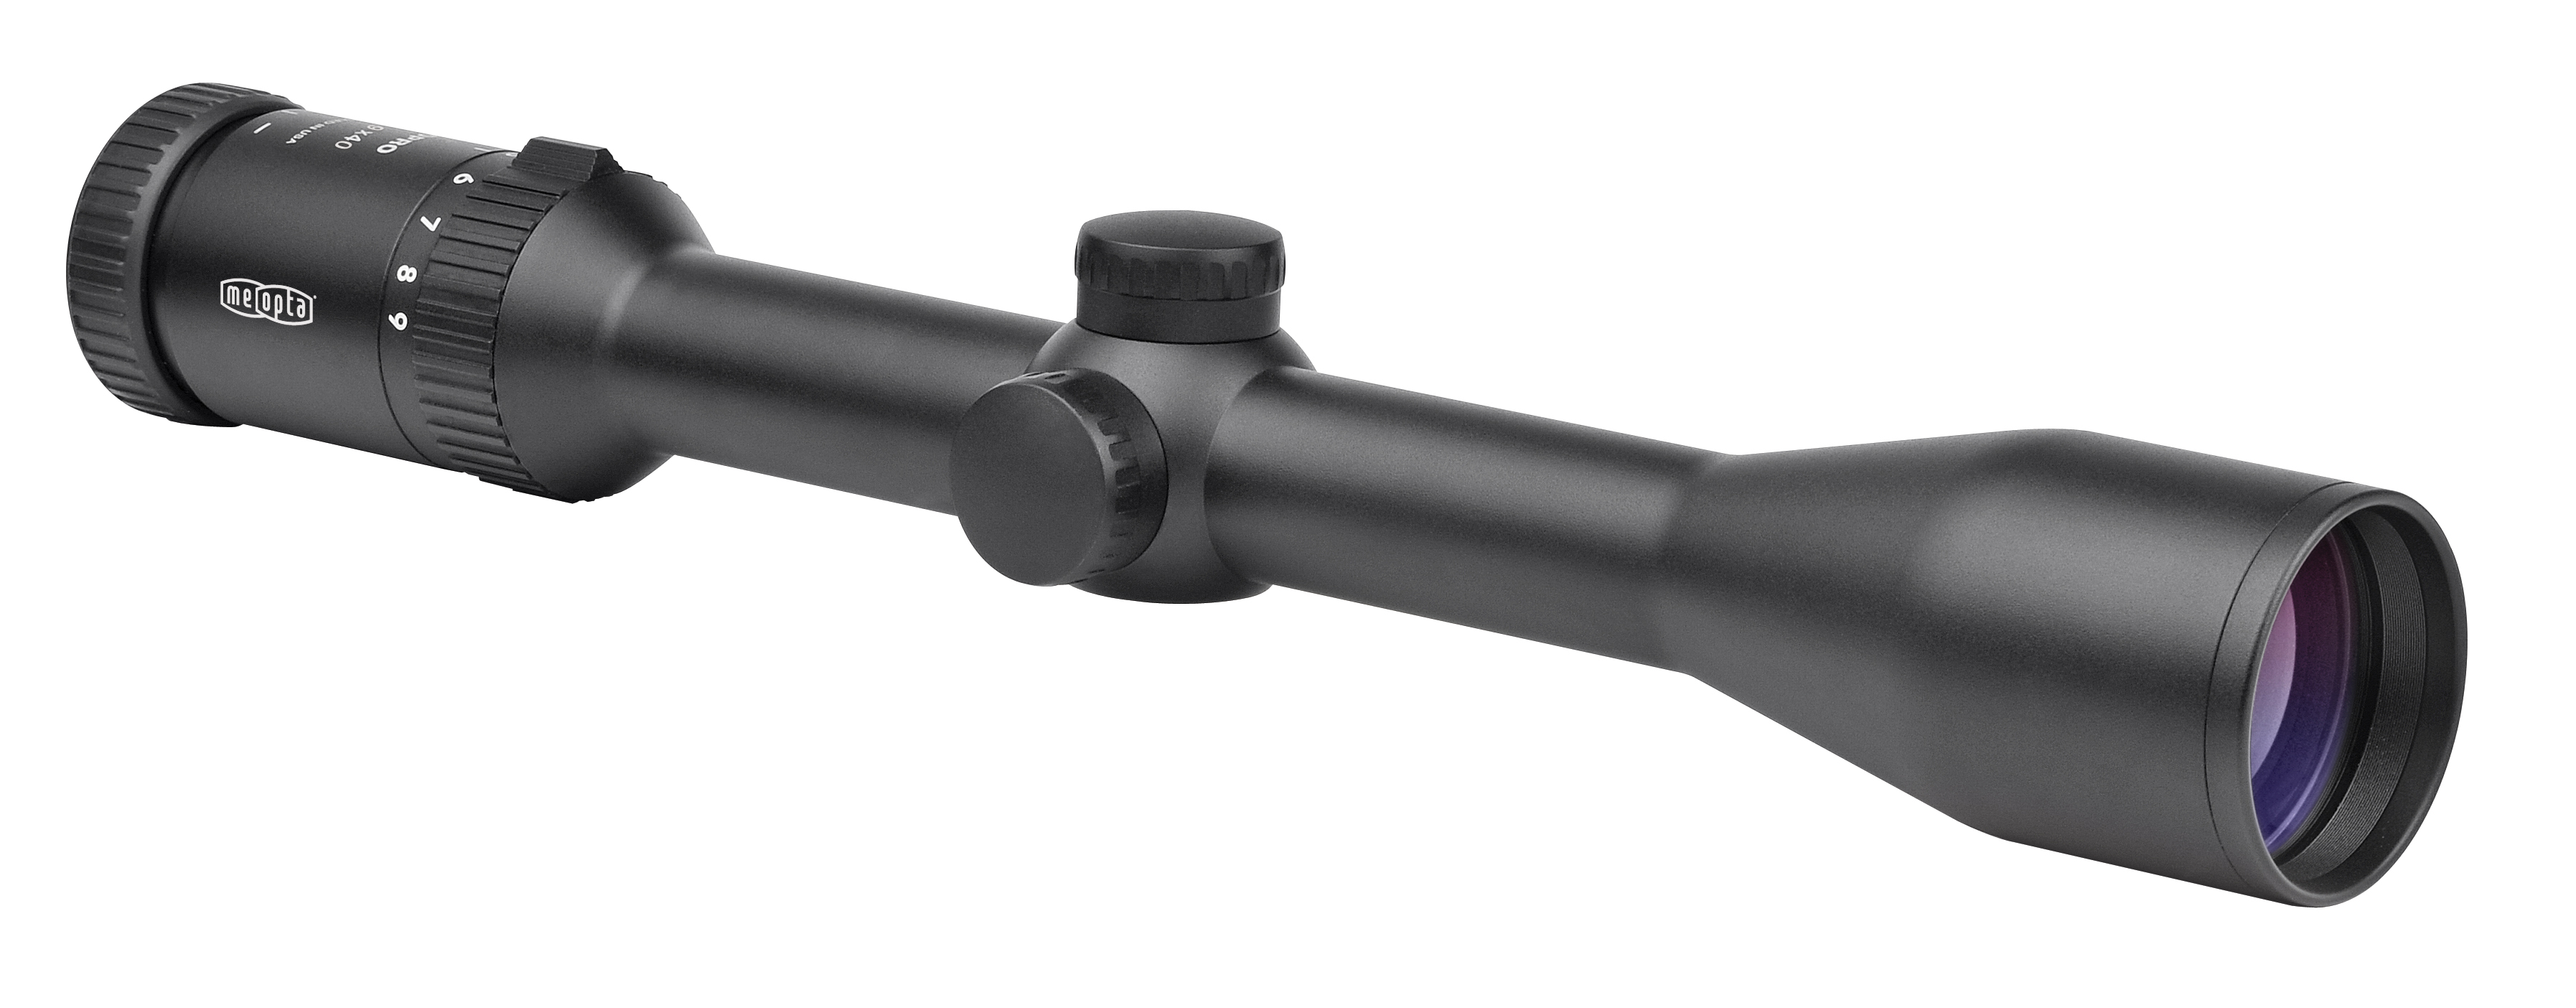 MEOPRO - 3-9x40 with #4 Reticle - MEO599020